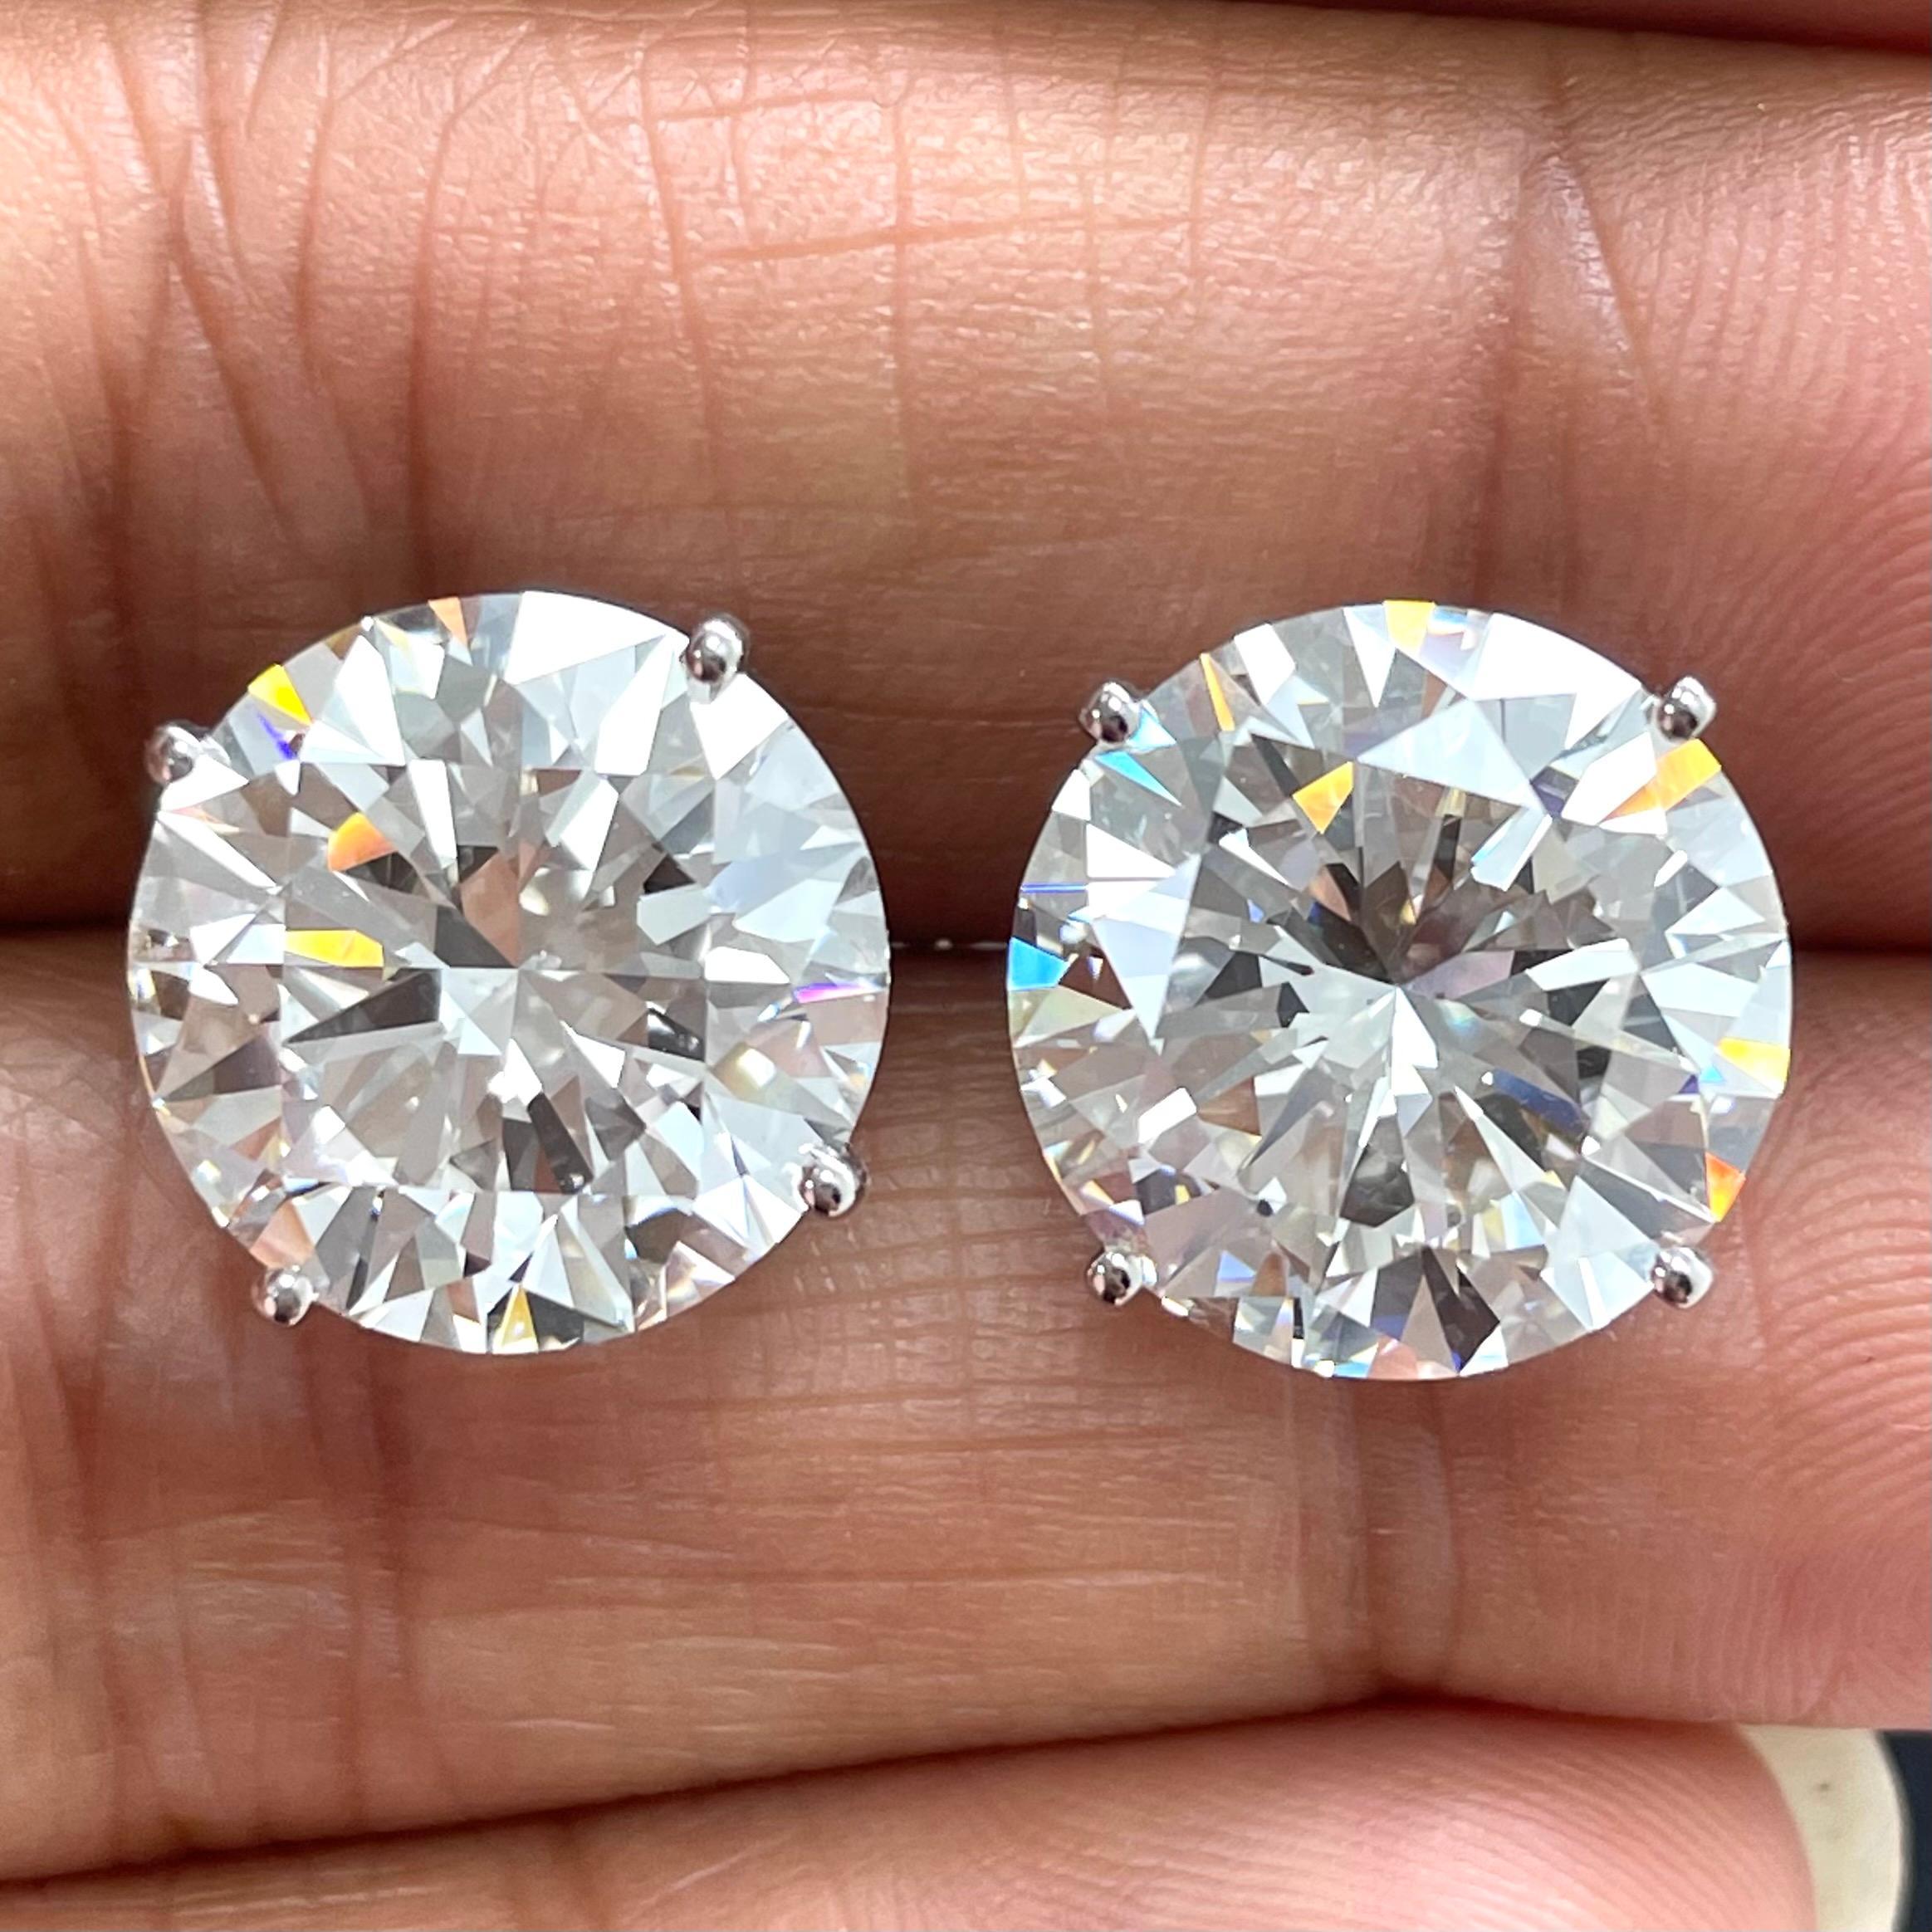 Diamond Solitaire Studs are a signature everyday piece of jewelry. They are a classic and a statement simultaneously. This stunning pair of 7.13 and 6.88 carat IVS2 features perfectly cut diamonds with exceptional fire, luster and